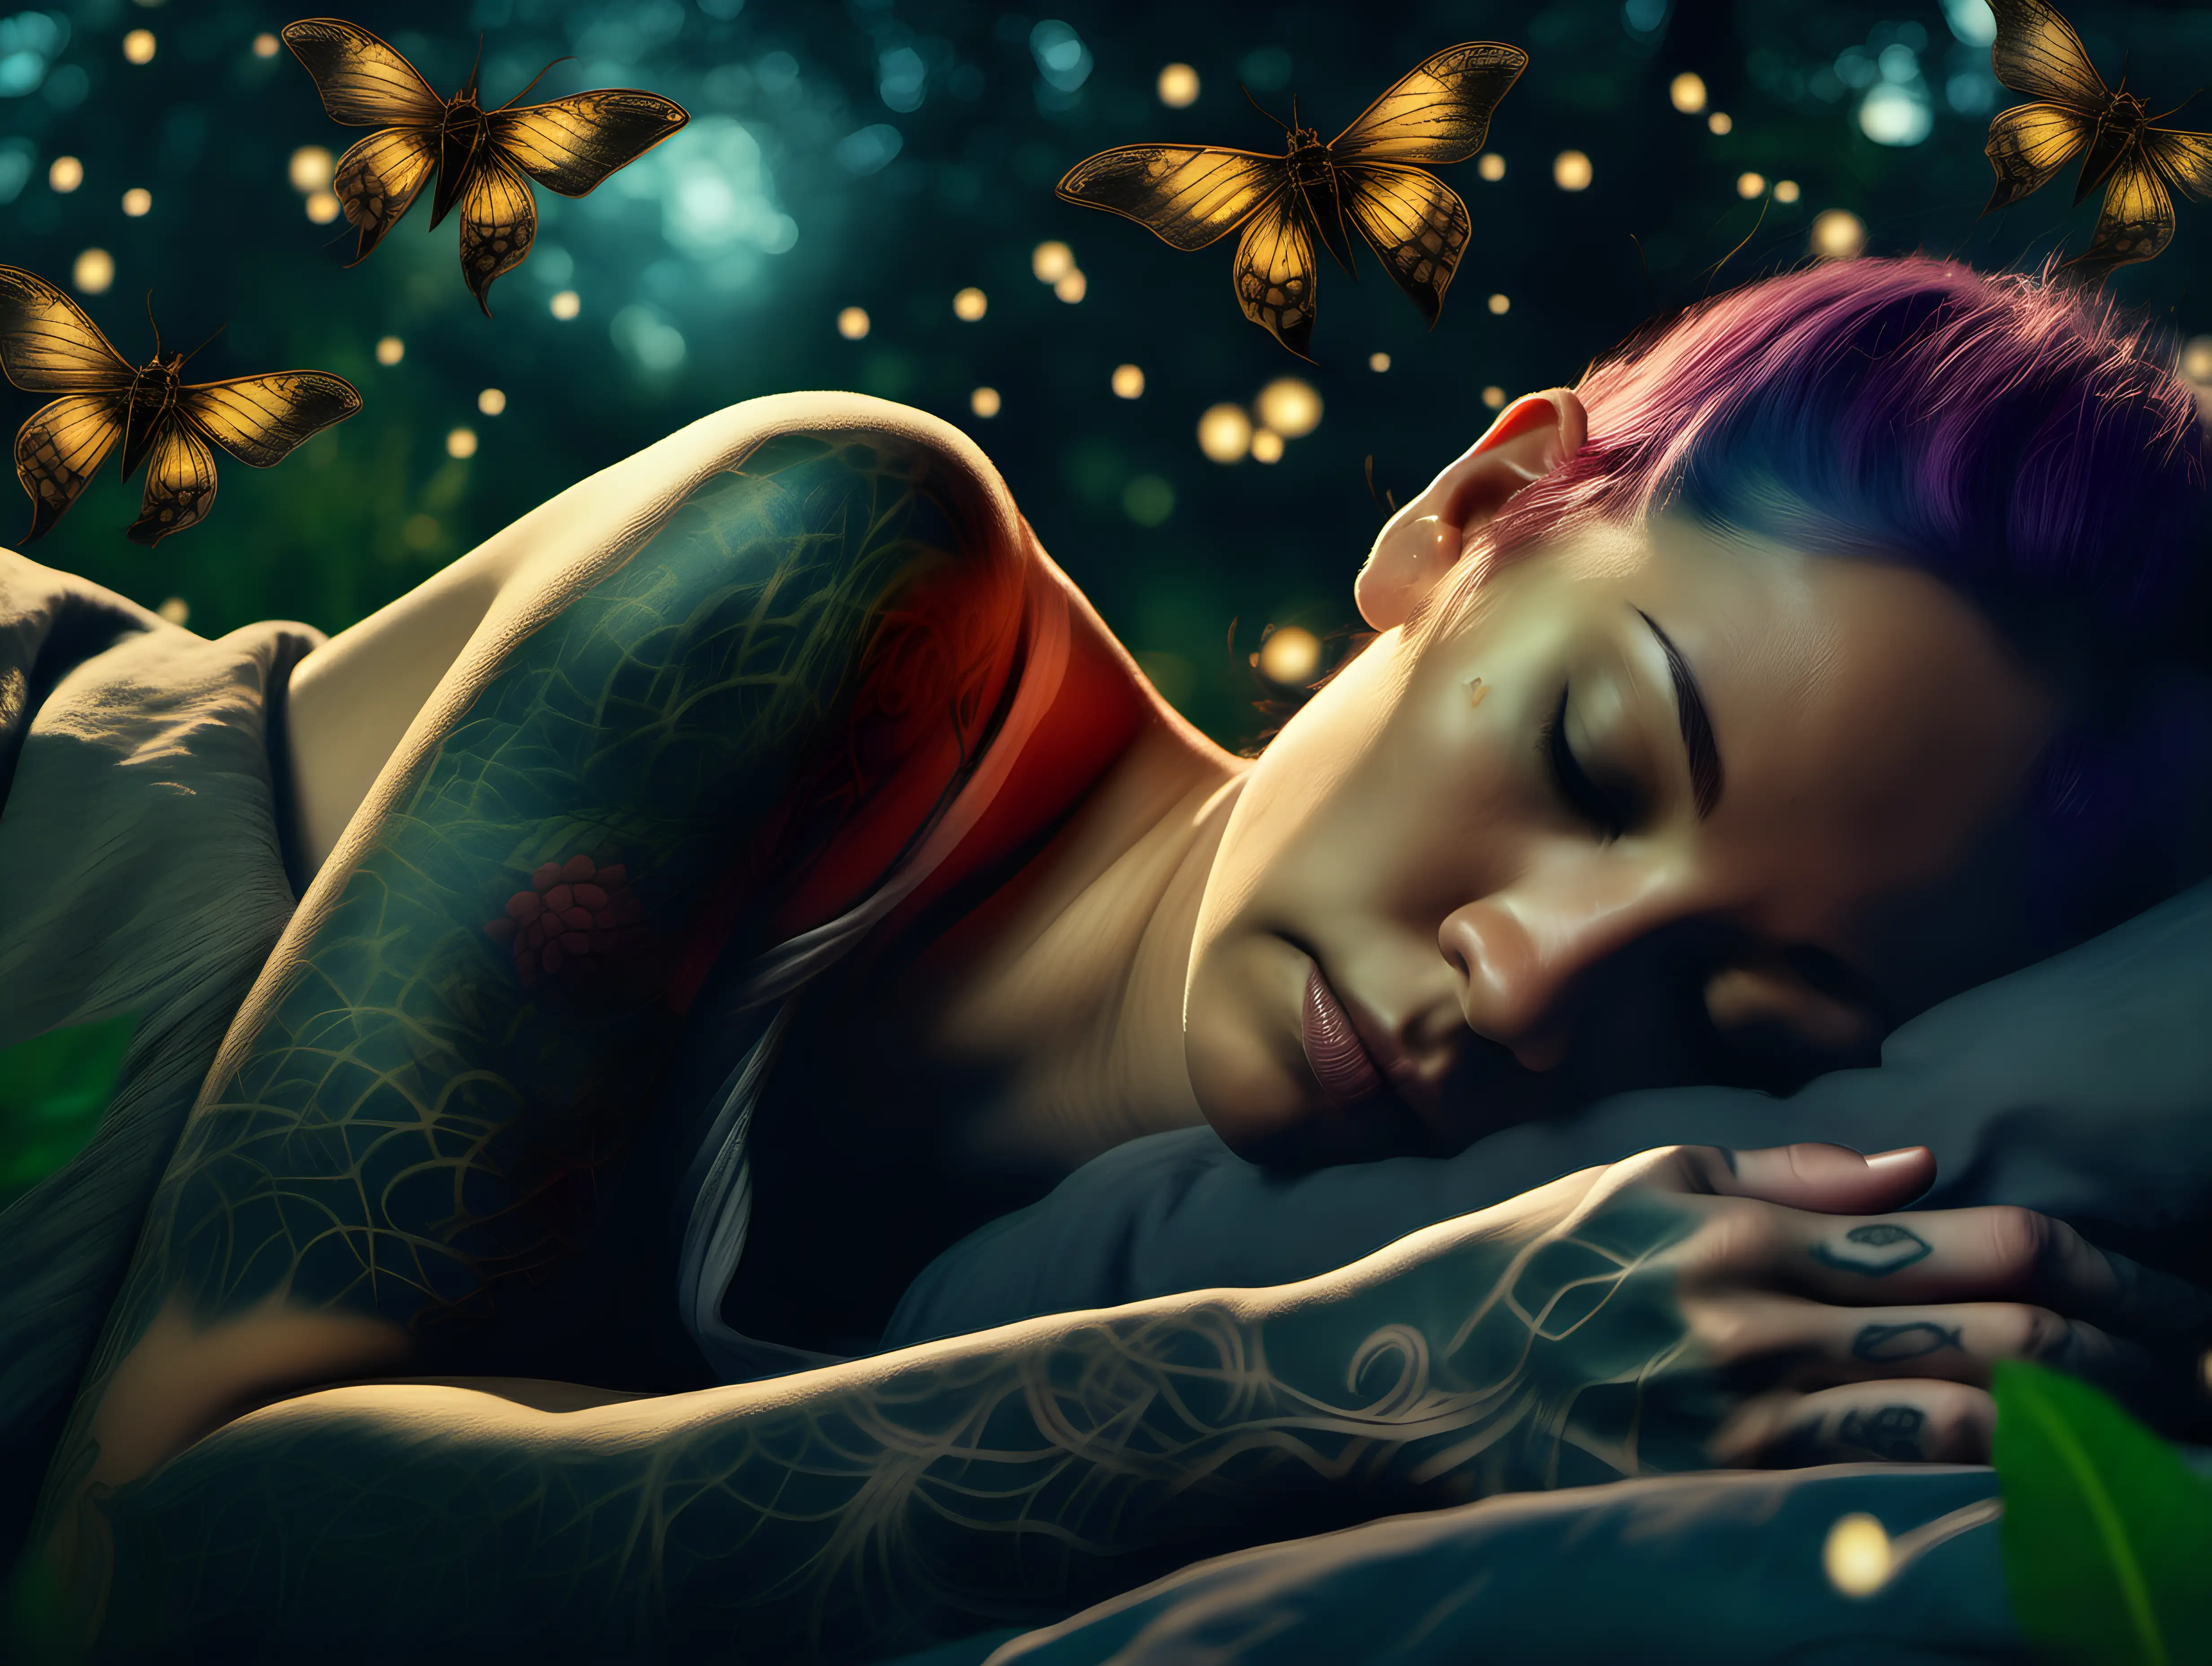 ultra-realistic high resolution and highly detailed photograph of a female human  with draconic tattoos, sleeping in a beautiful garden lit up by fireflies